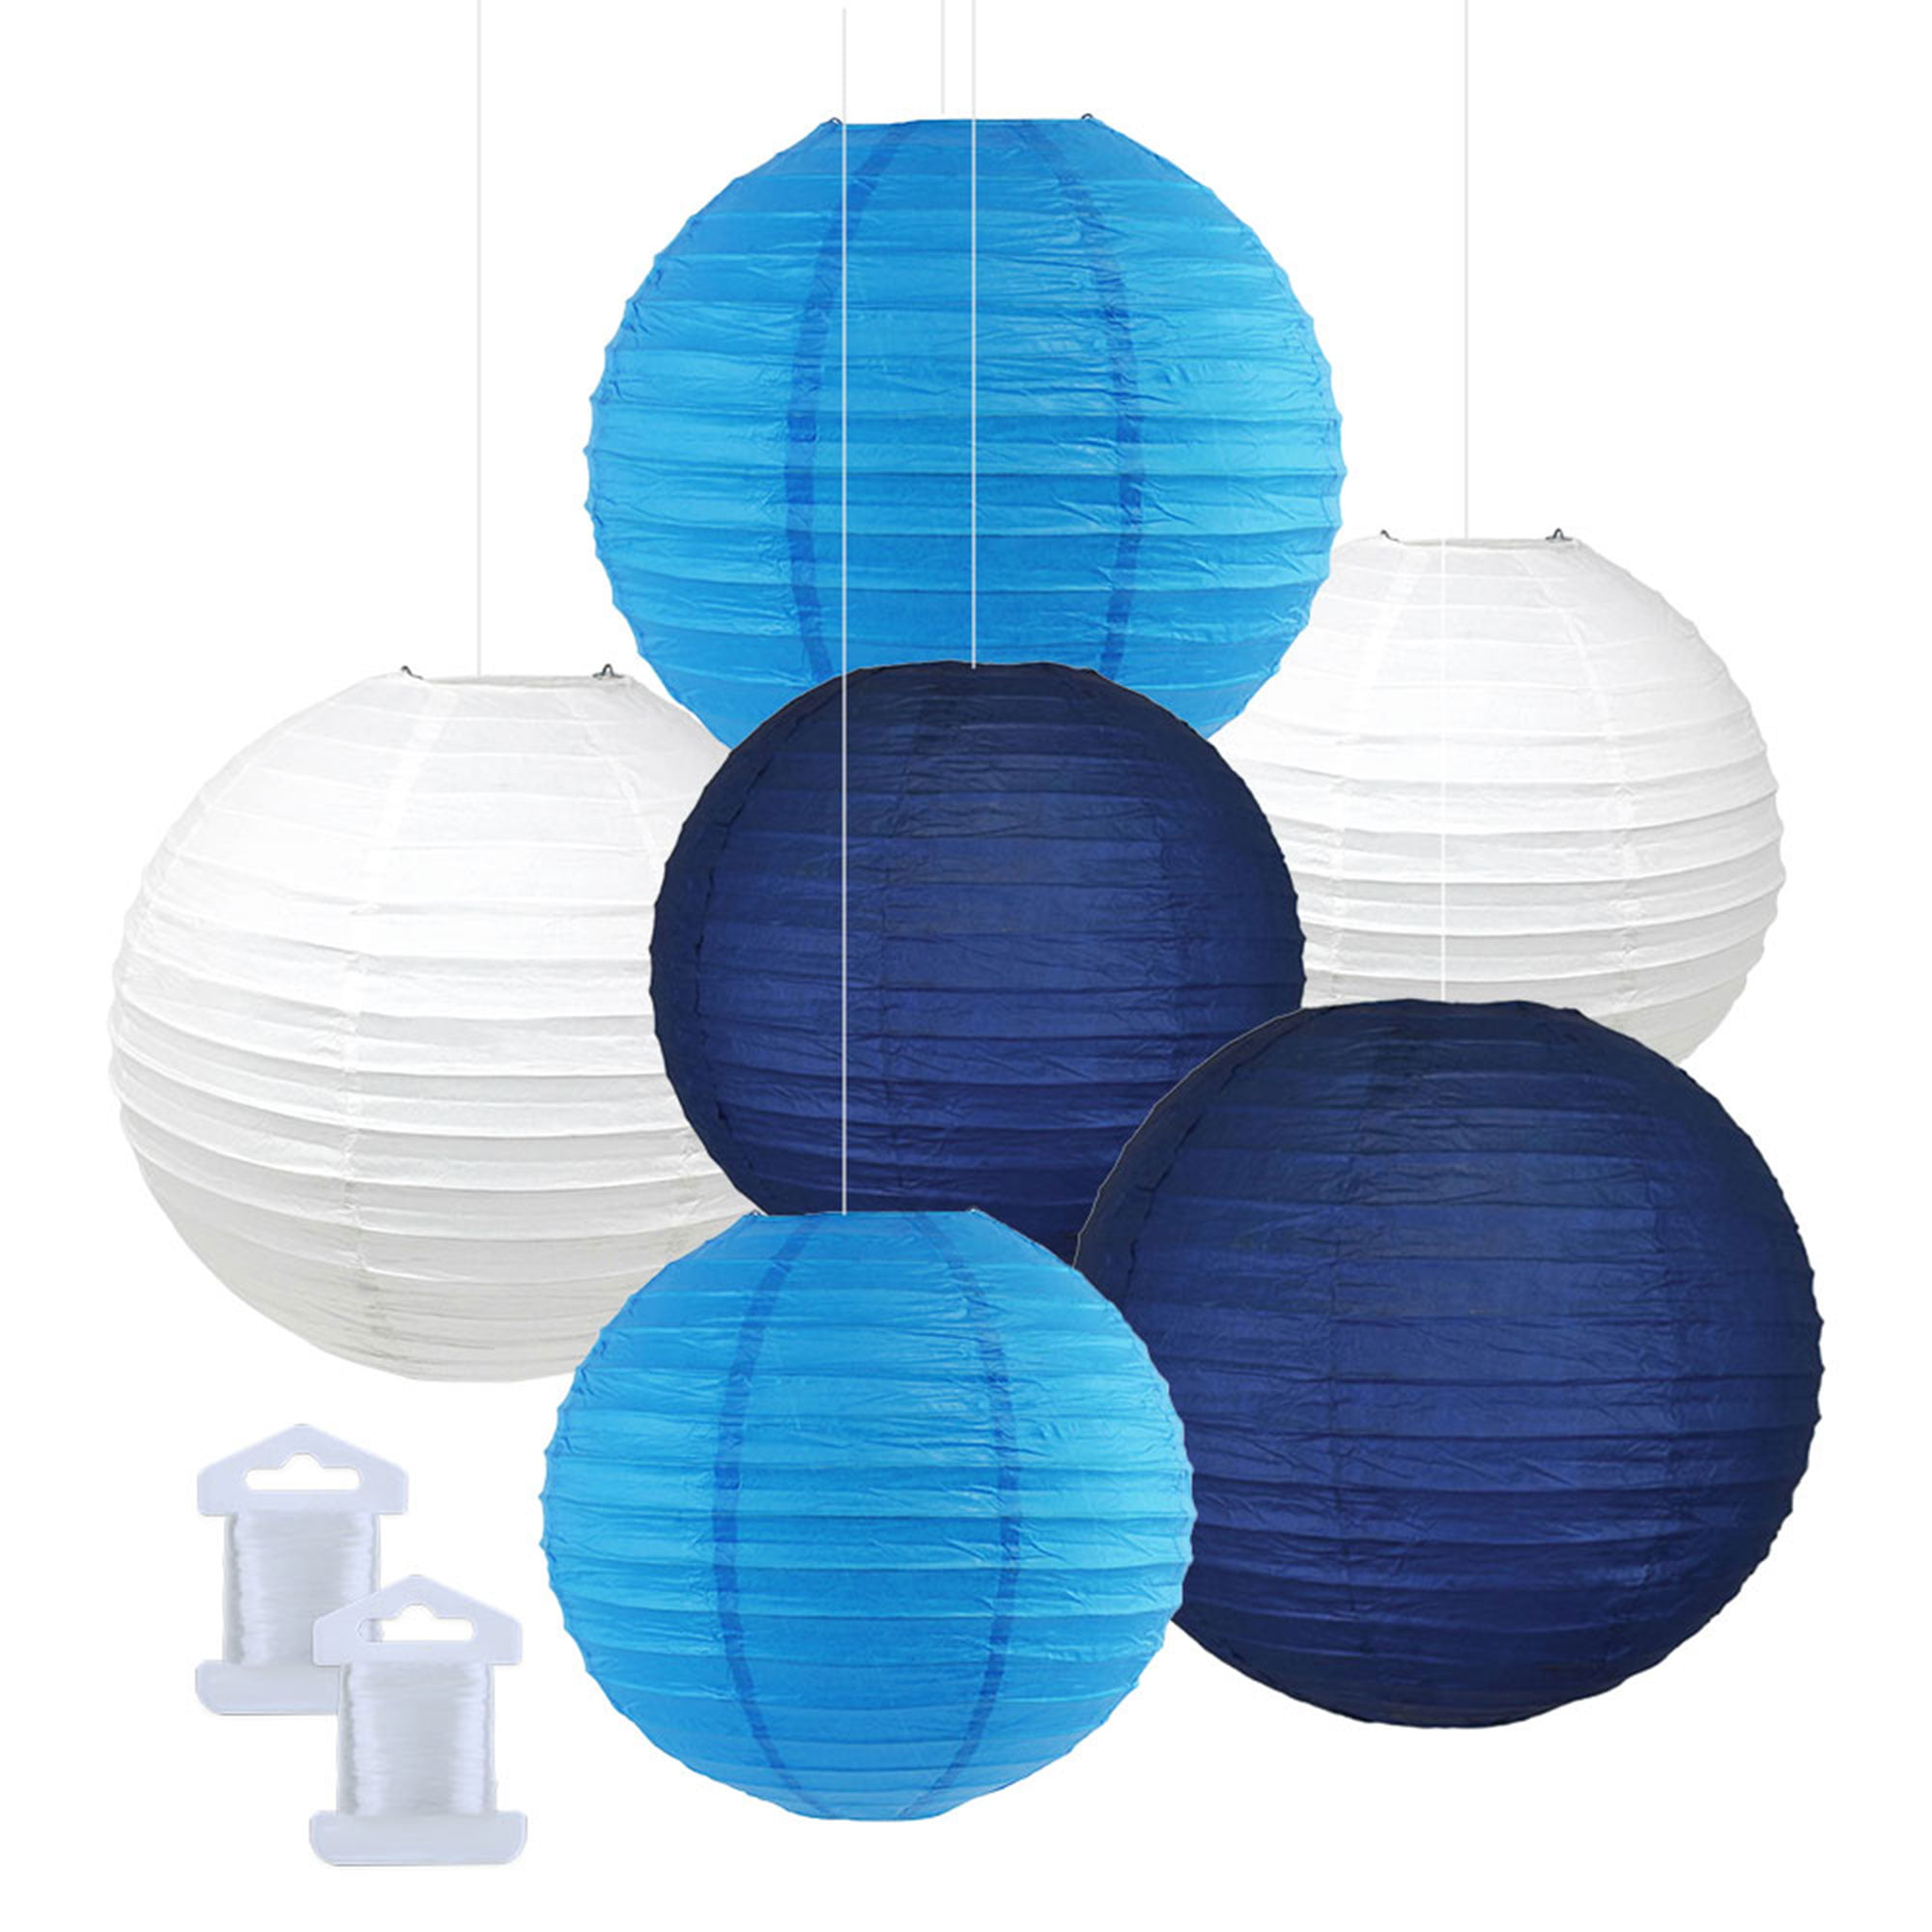 10 cm Paper Lanterns Mix Color Packs of 6 Round Paper Lanterns Lampshade Party Decorations Dark Blue Shade, 4 